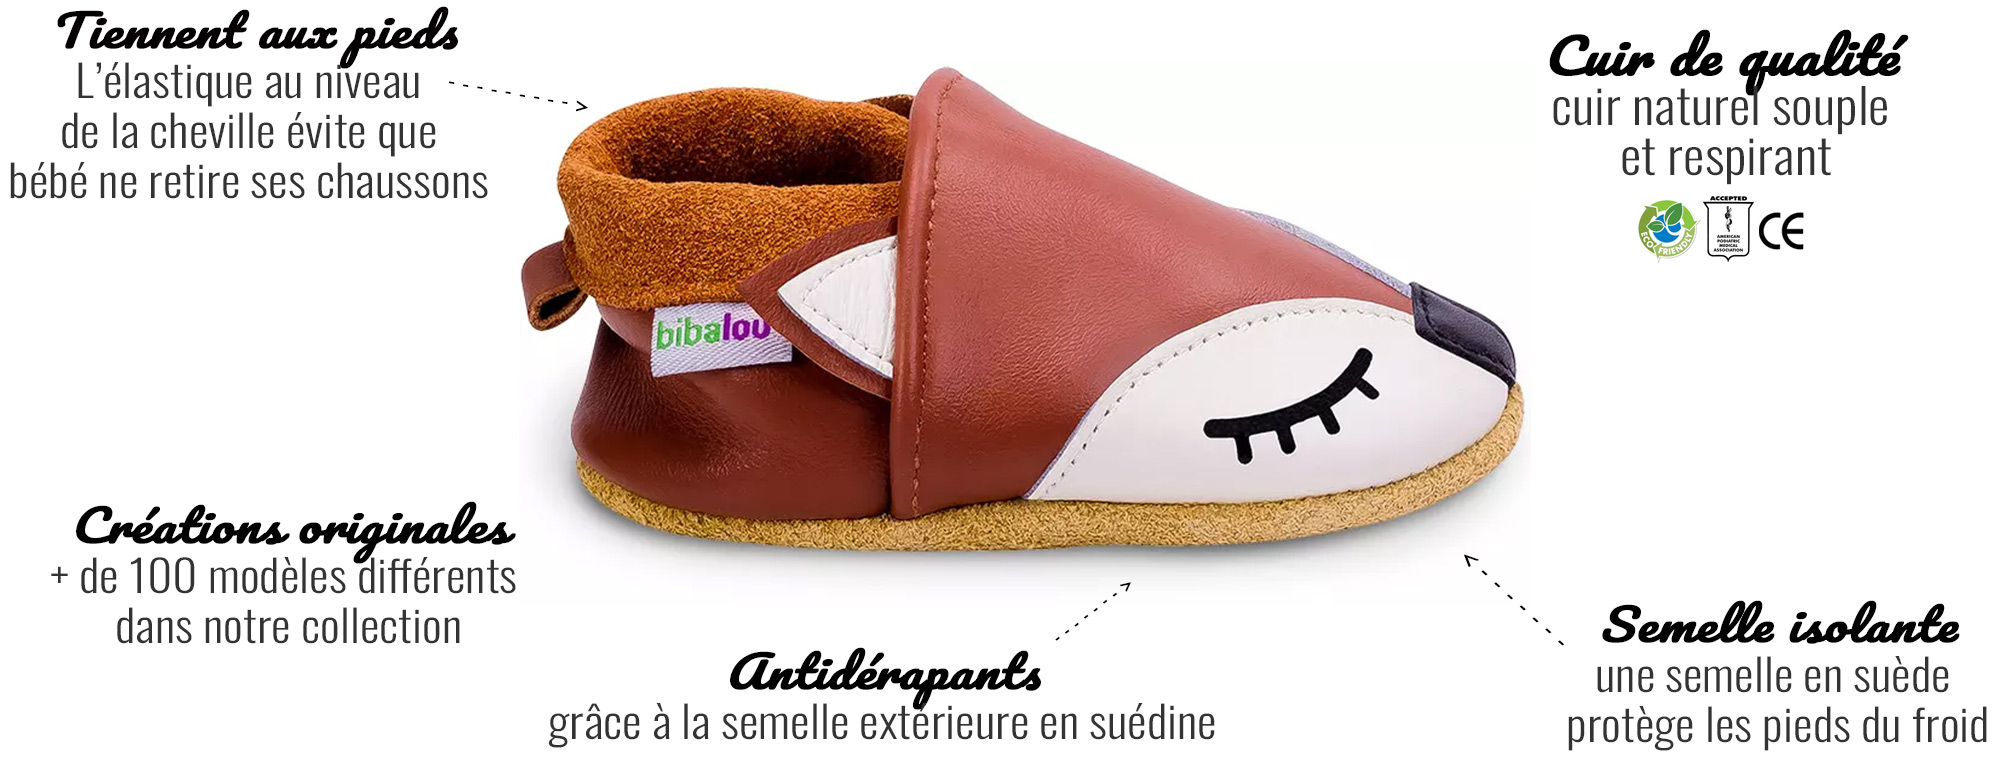 Chausson dinosaure • Chaussons Univers